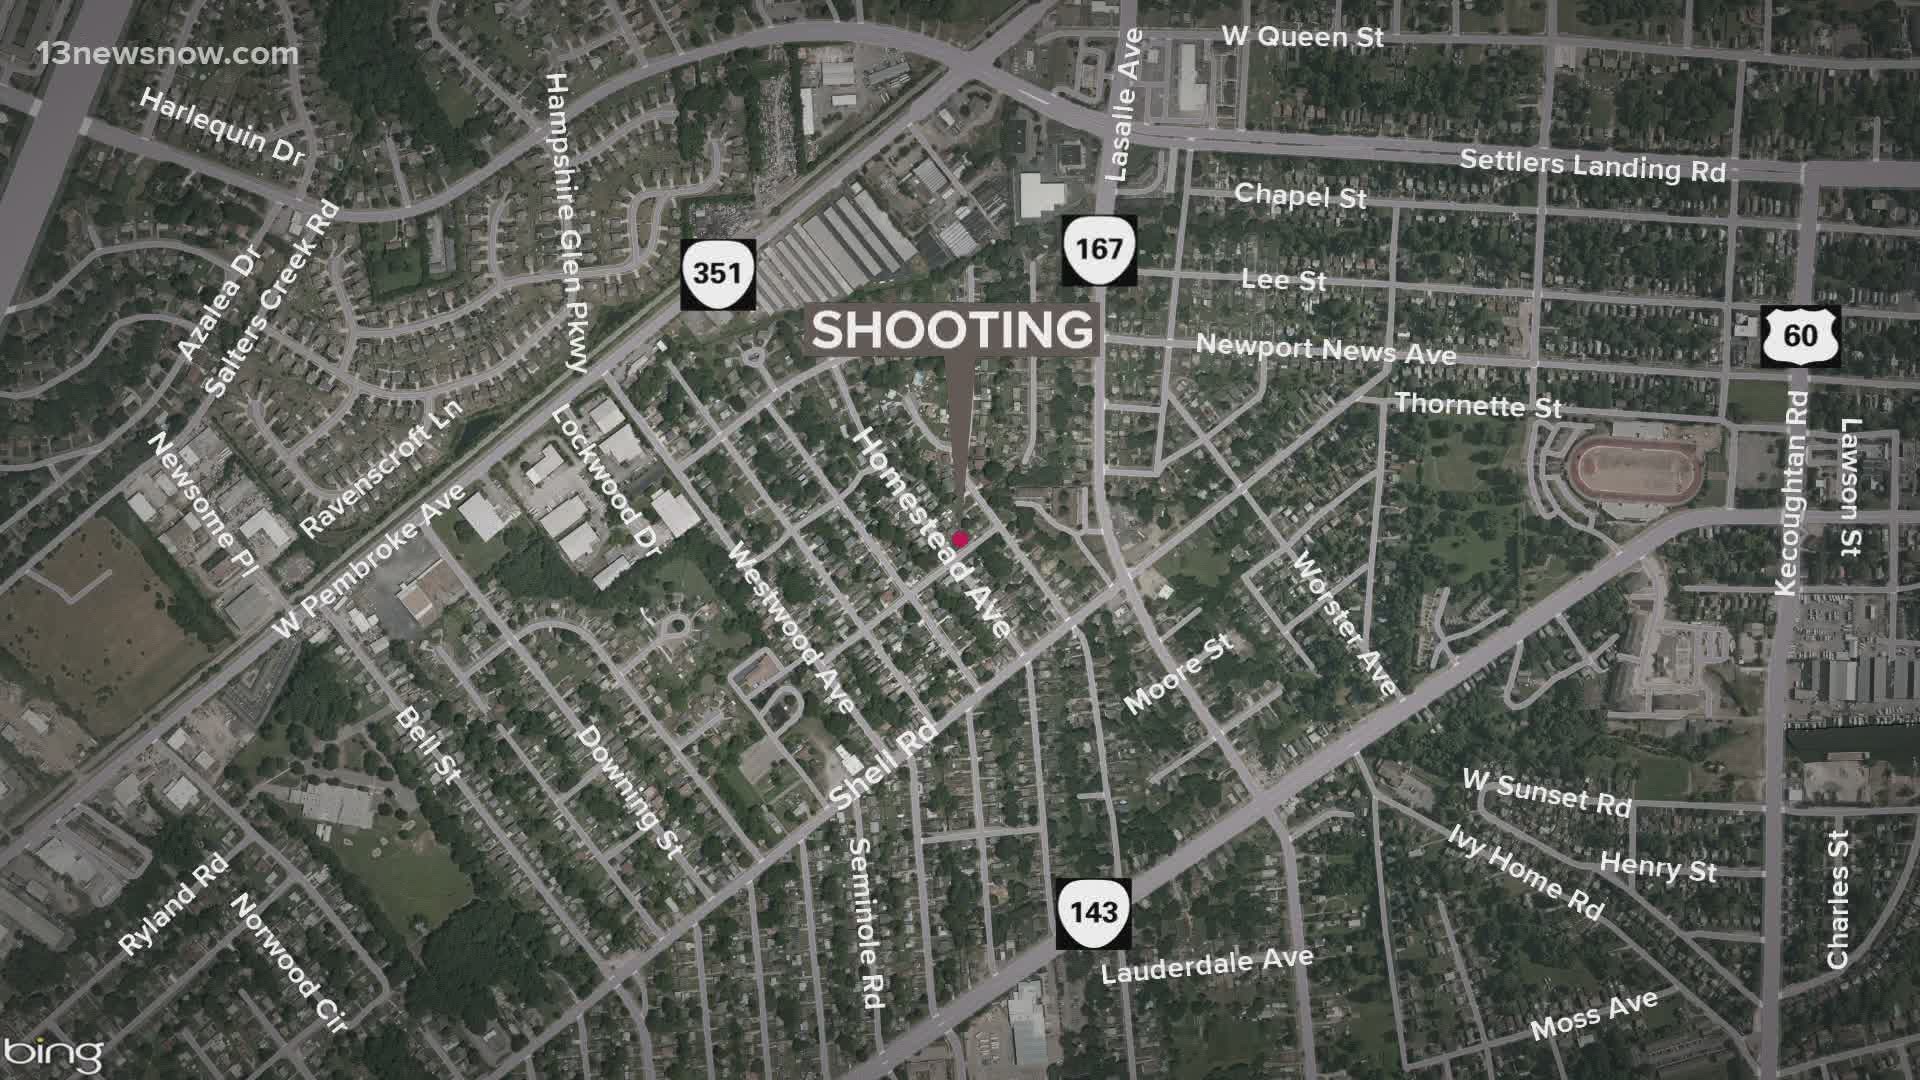 Hampton police said one of the two men who were shot in the 700 block of Homestead Avenue died, the other man is expected to be okay.